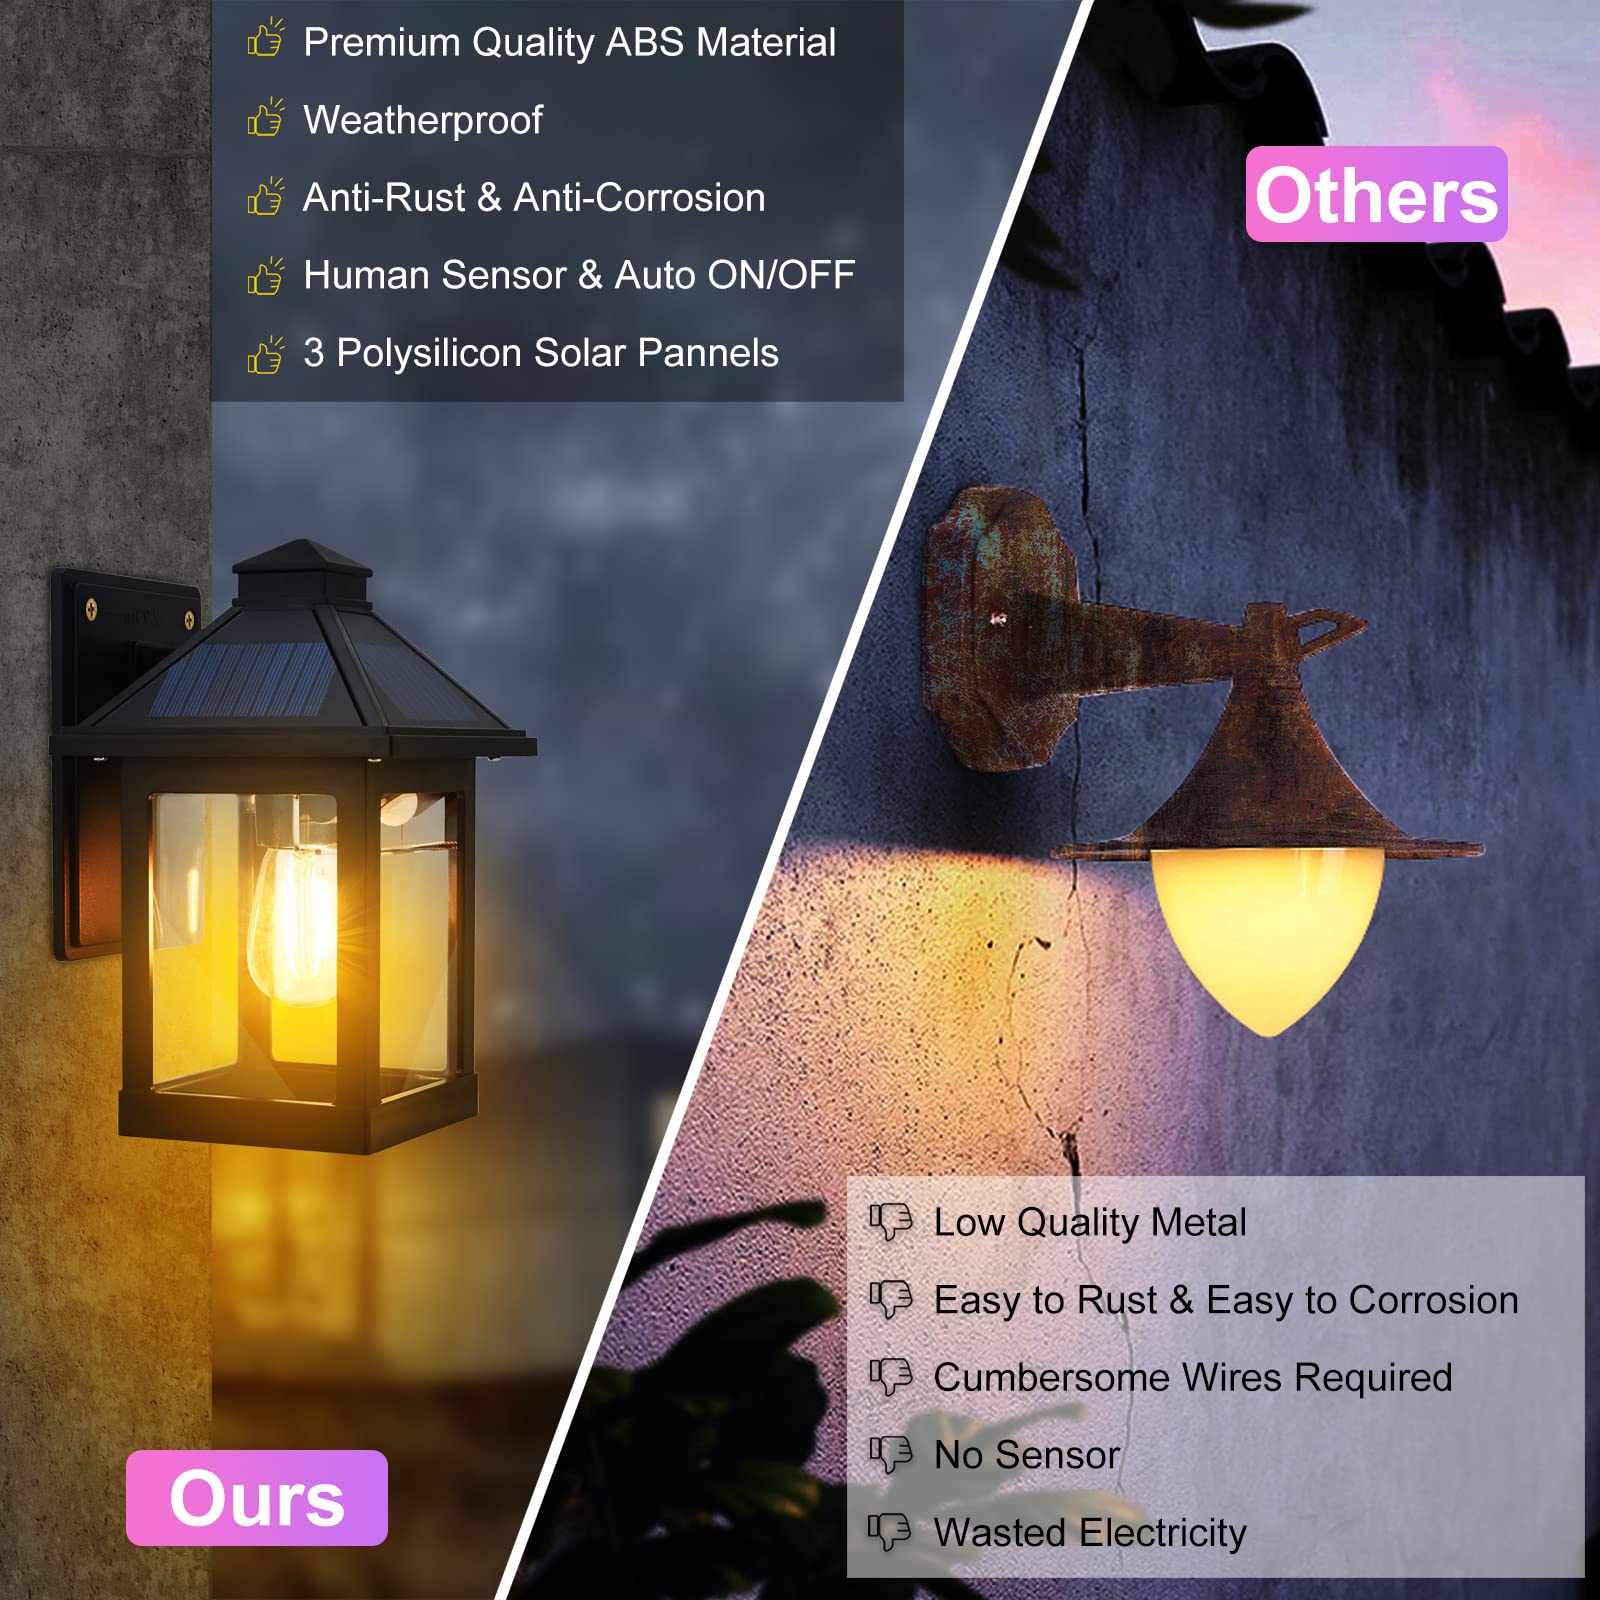 UOOIUMOY 2 Pack Solar Powered Wall Lantern Lights with 3 Lighting Modes, LED Dusk to Dawn Solar Sconce Outdoor Wall Mount, Motion Sensor Front Porch Lights Fixtures Waterproof for Patio Garage